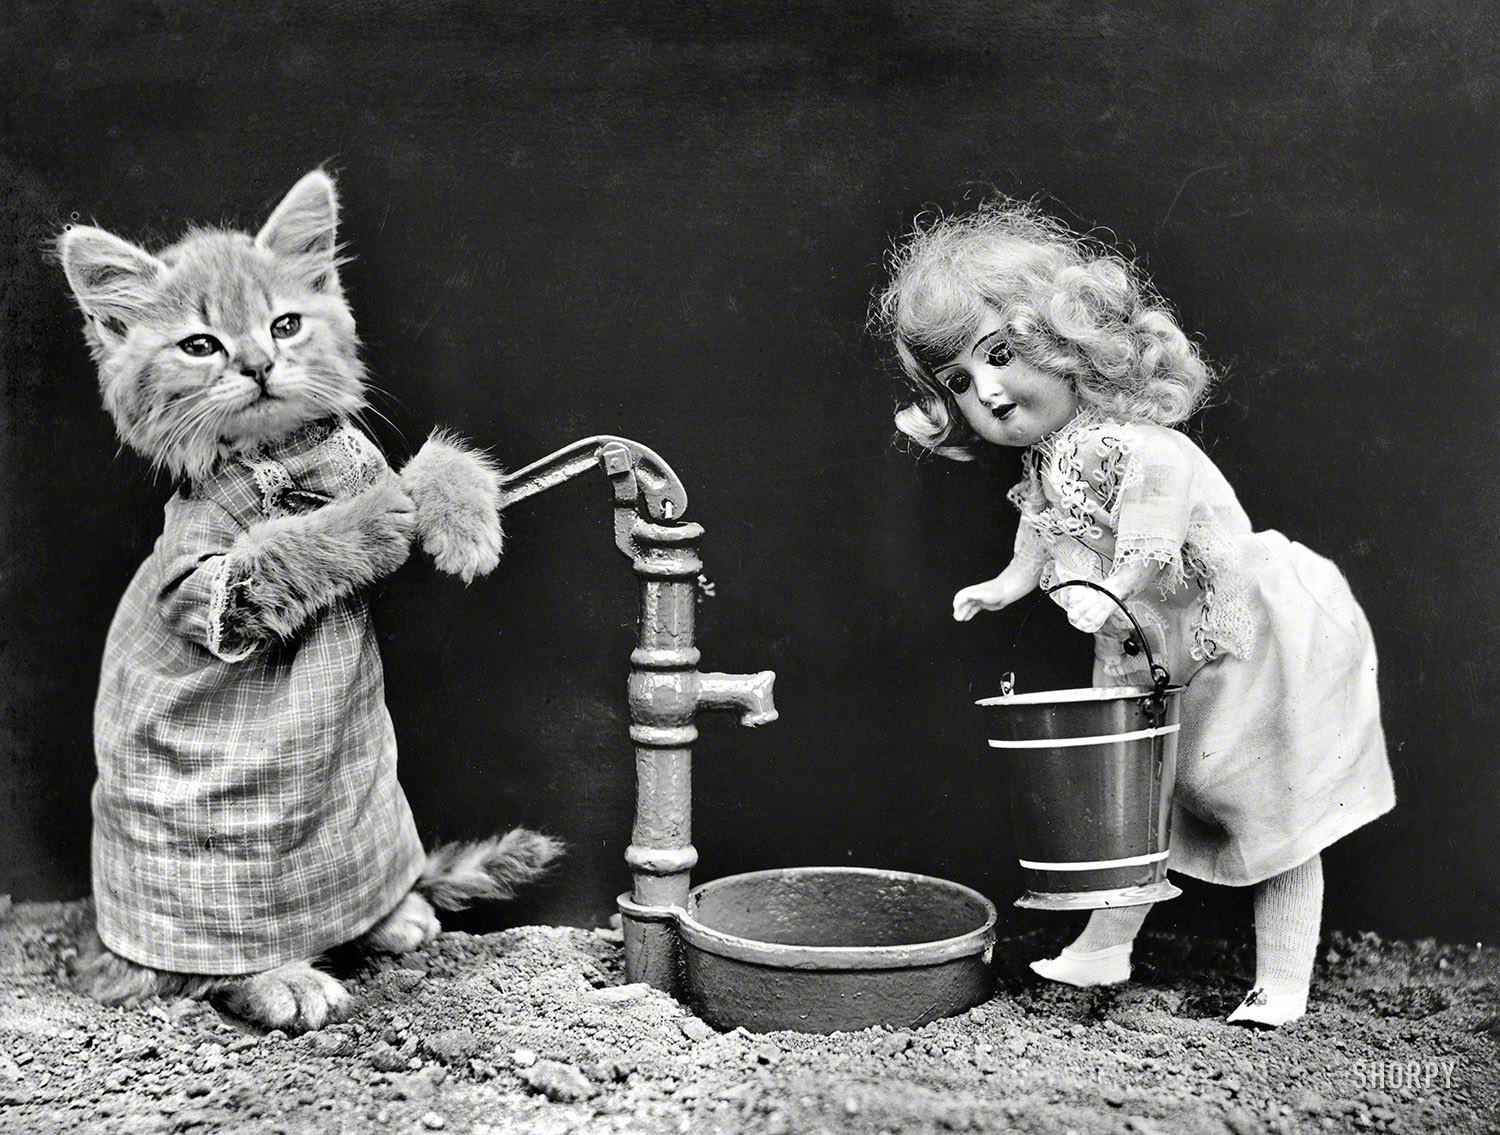 1914. "Kitten in costume grasping pump handle, ready to fill water bucket carried by doll." Another of the vaguely spooky tableaux featuring posed dogs and cats that were a specialty of novelty photographer Harry W. Frees. View full size.